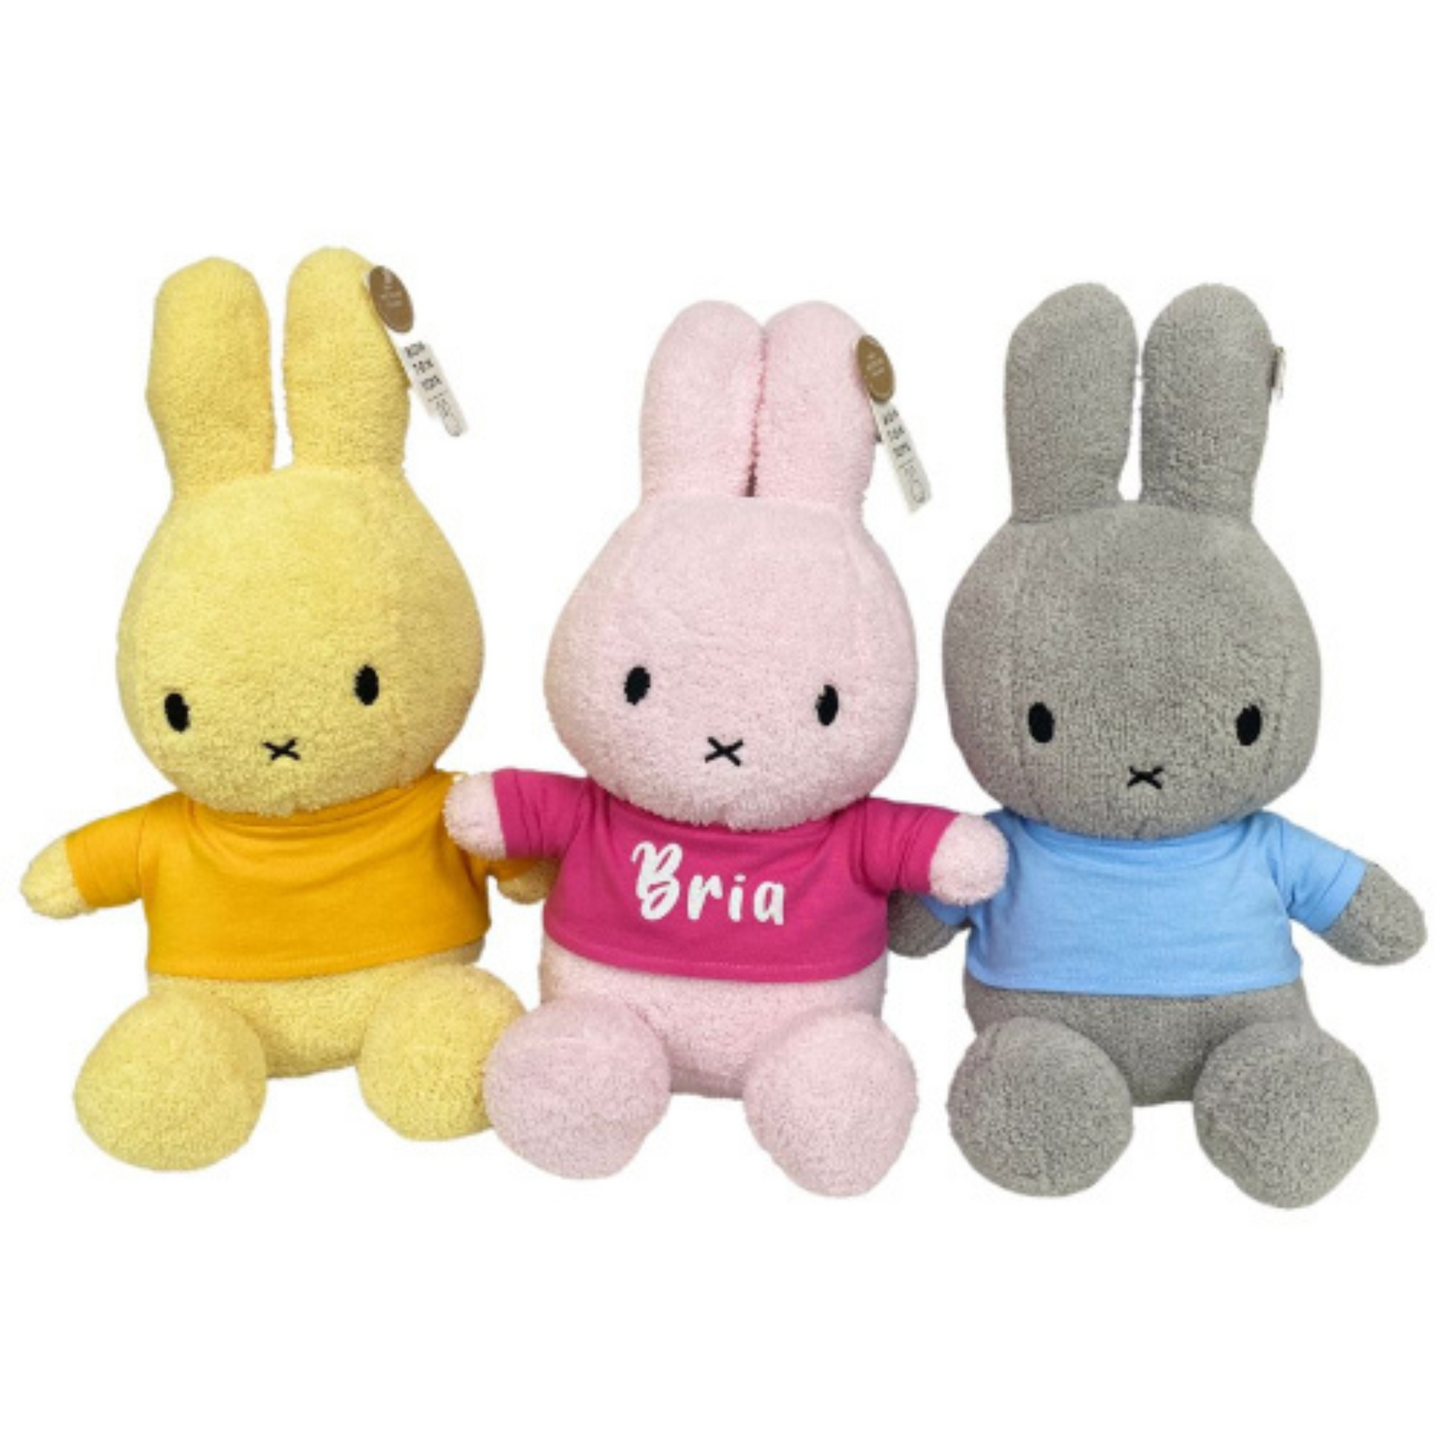 Personalized Miffy Soft Toy with Name - 4 Colors (33cm)